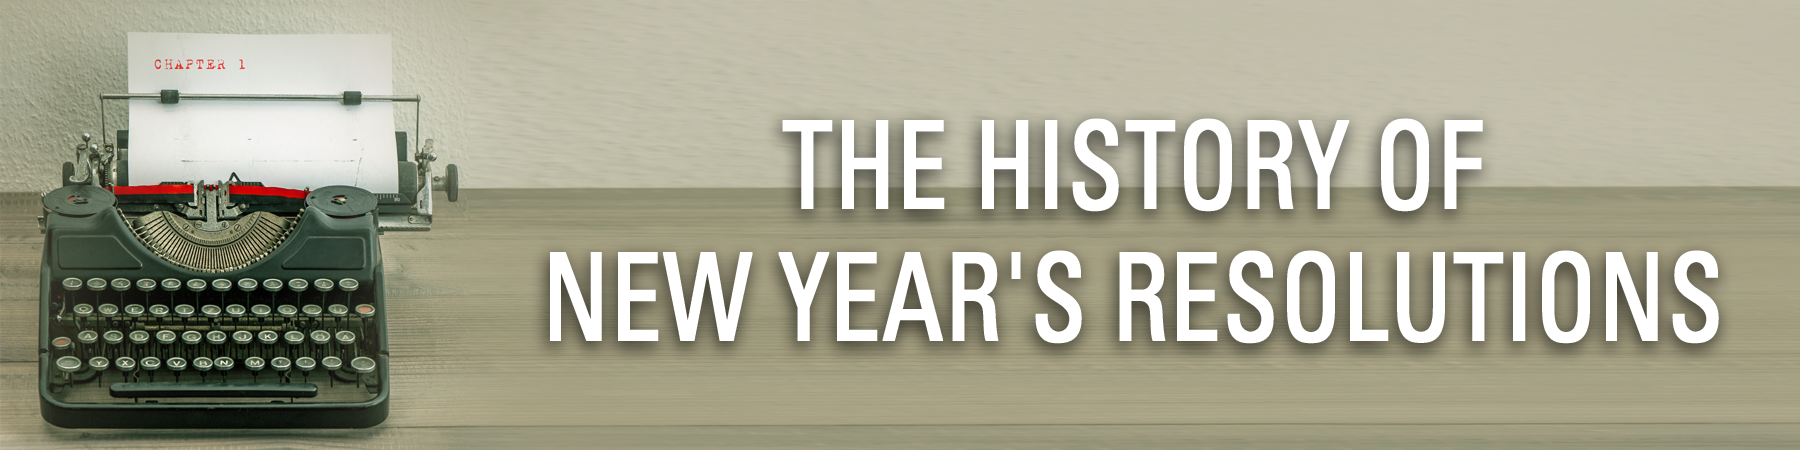 The History of New Year's Resolutions